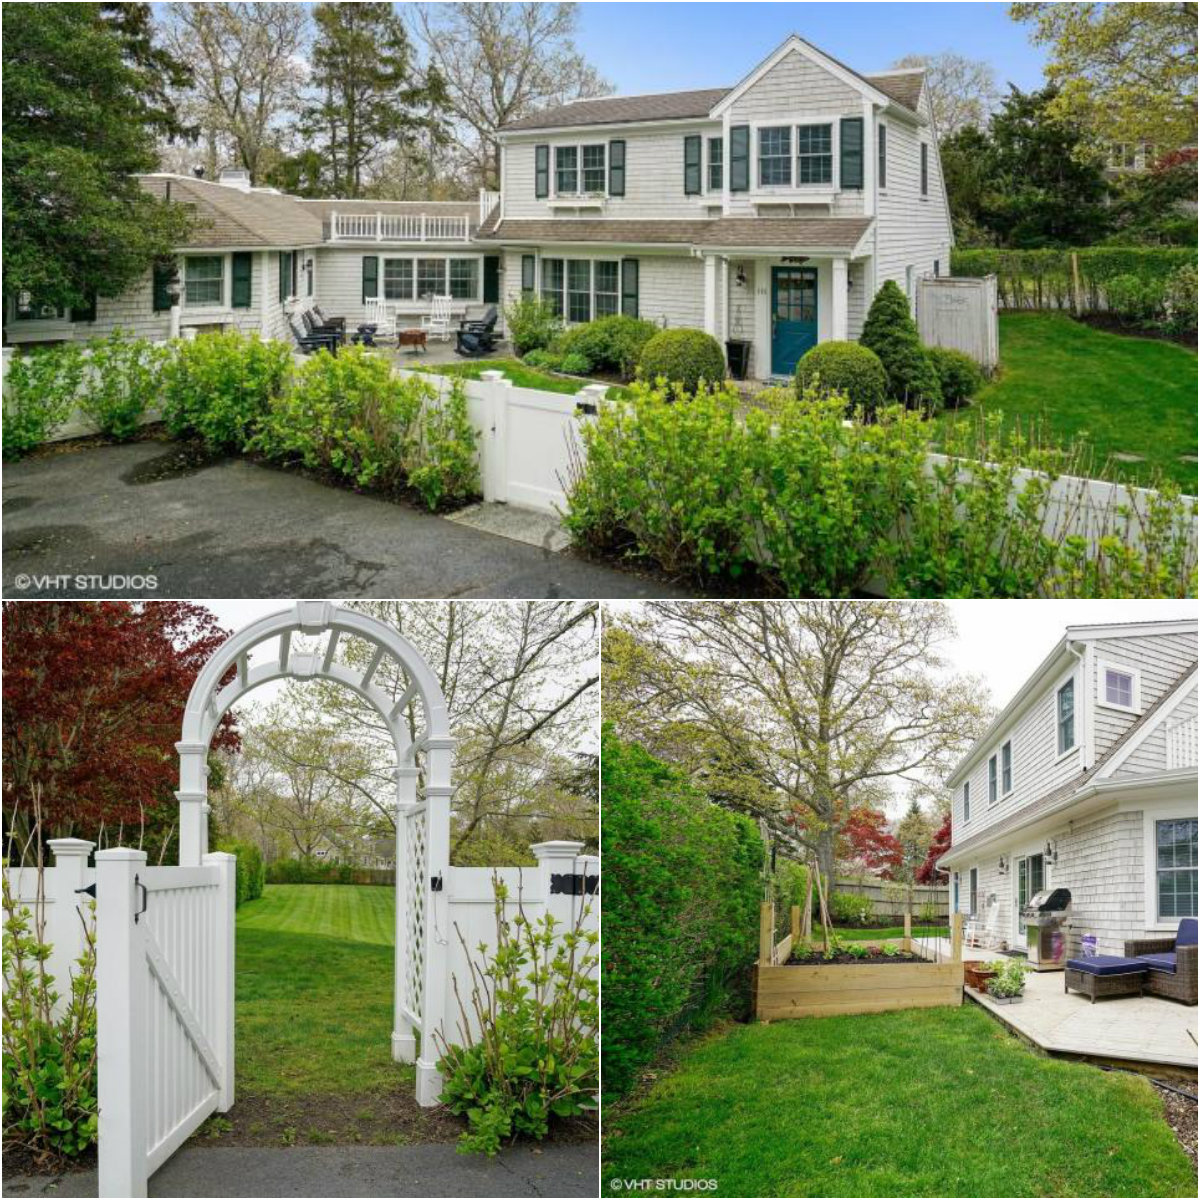 Images of Beautiful Garden at 185 Marston Avenue in Hyannis Port in Cape Cod, MA